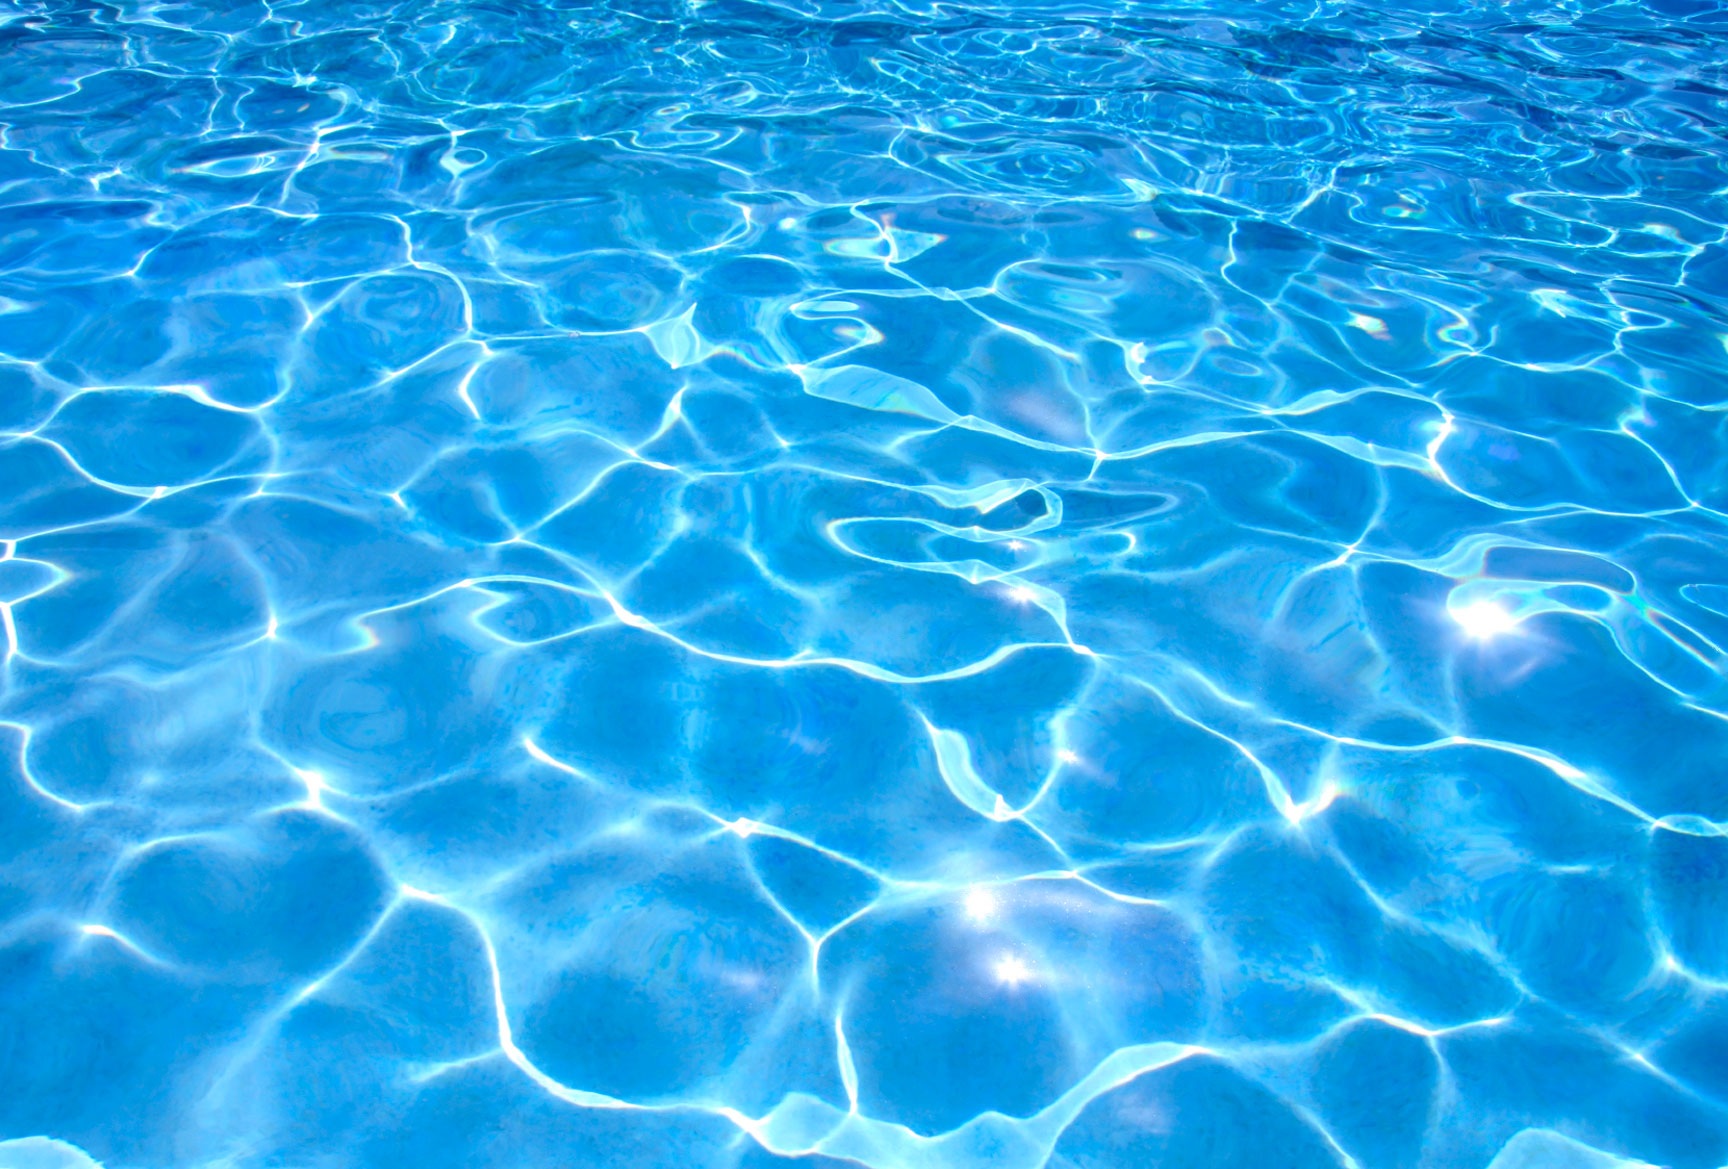 500 Pool Water Pictures HD  Download Free Images on Unsplash